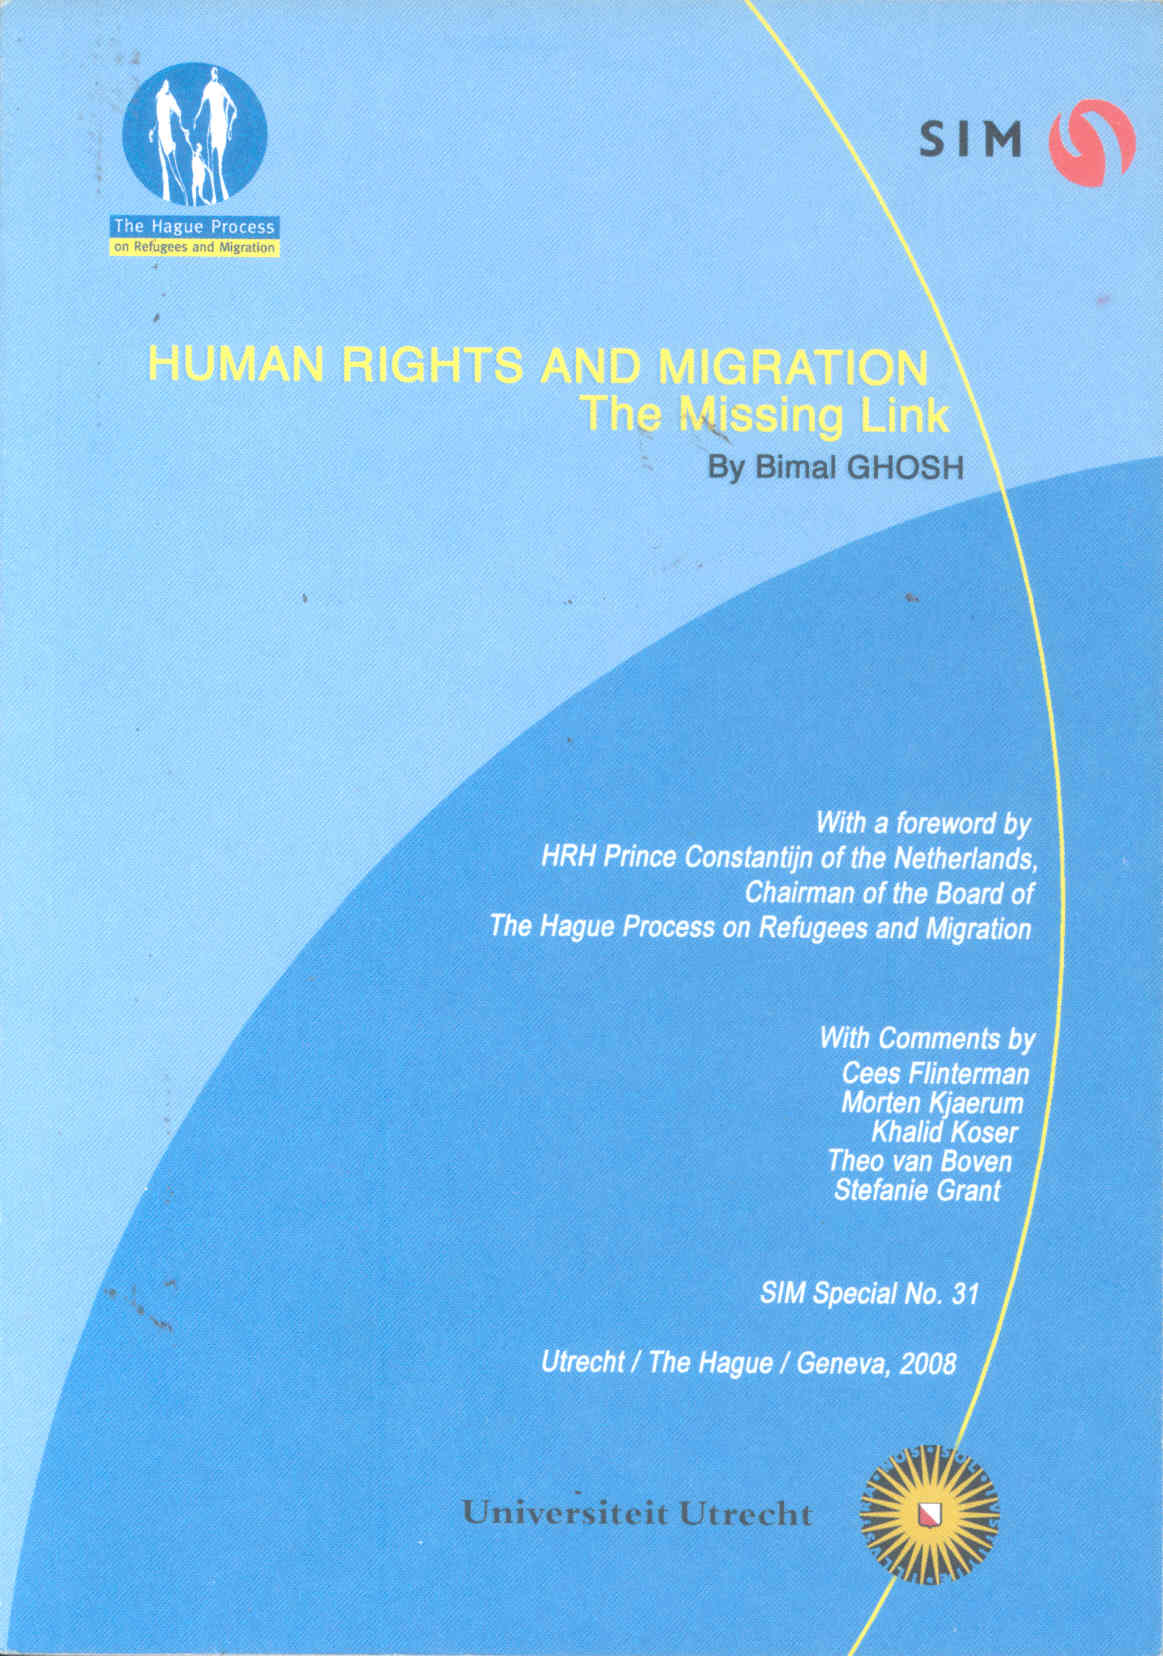  Human rights and migration : the missing link 